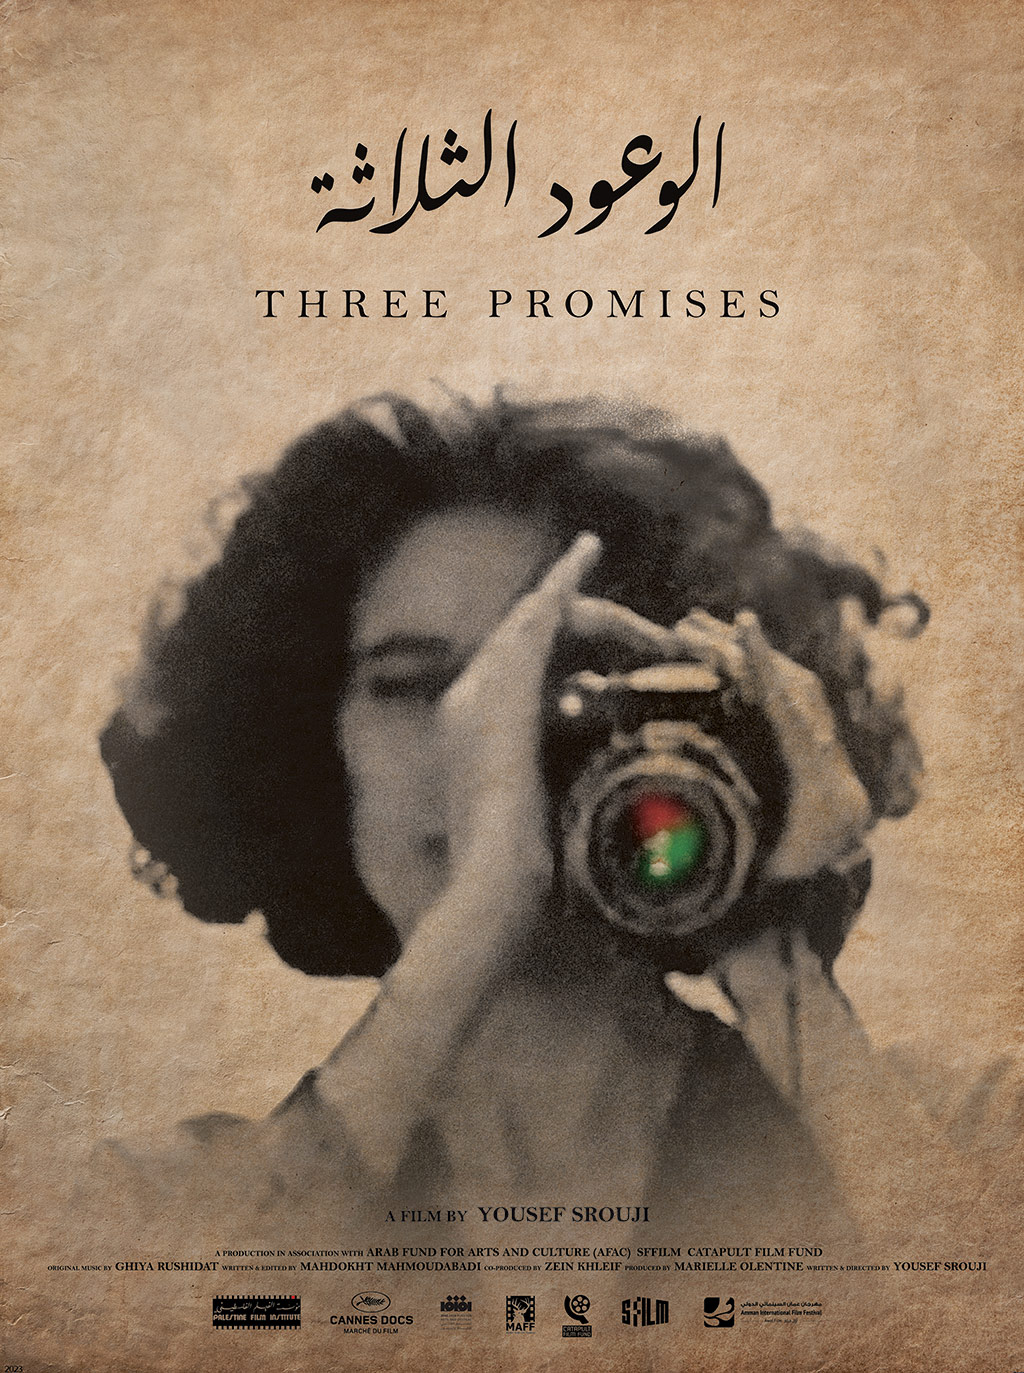 Three Promises Documentary Film Interview with Palestinian Filmmaker Yousef Srouji